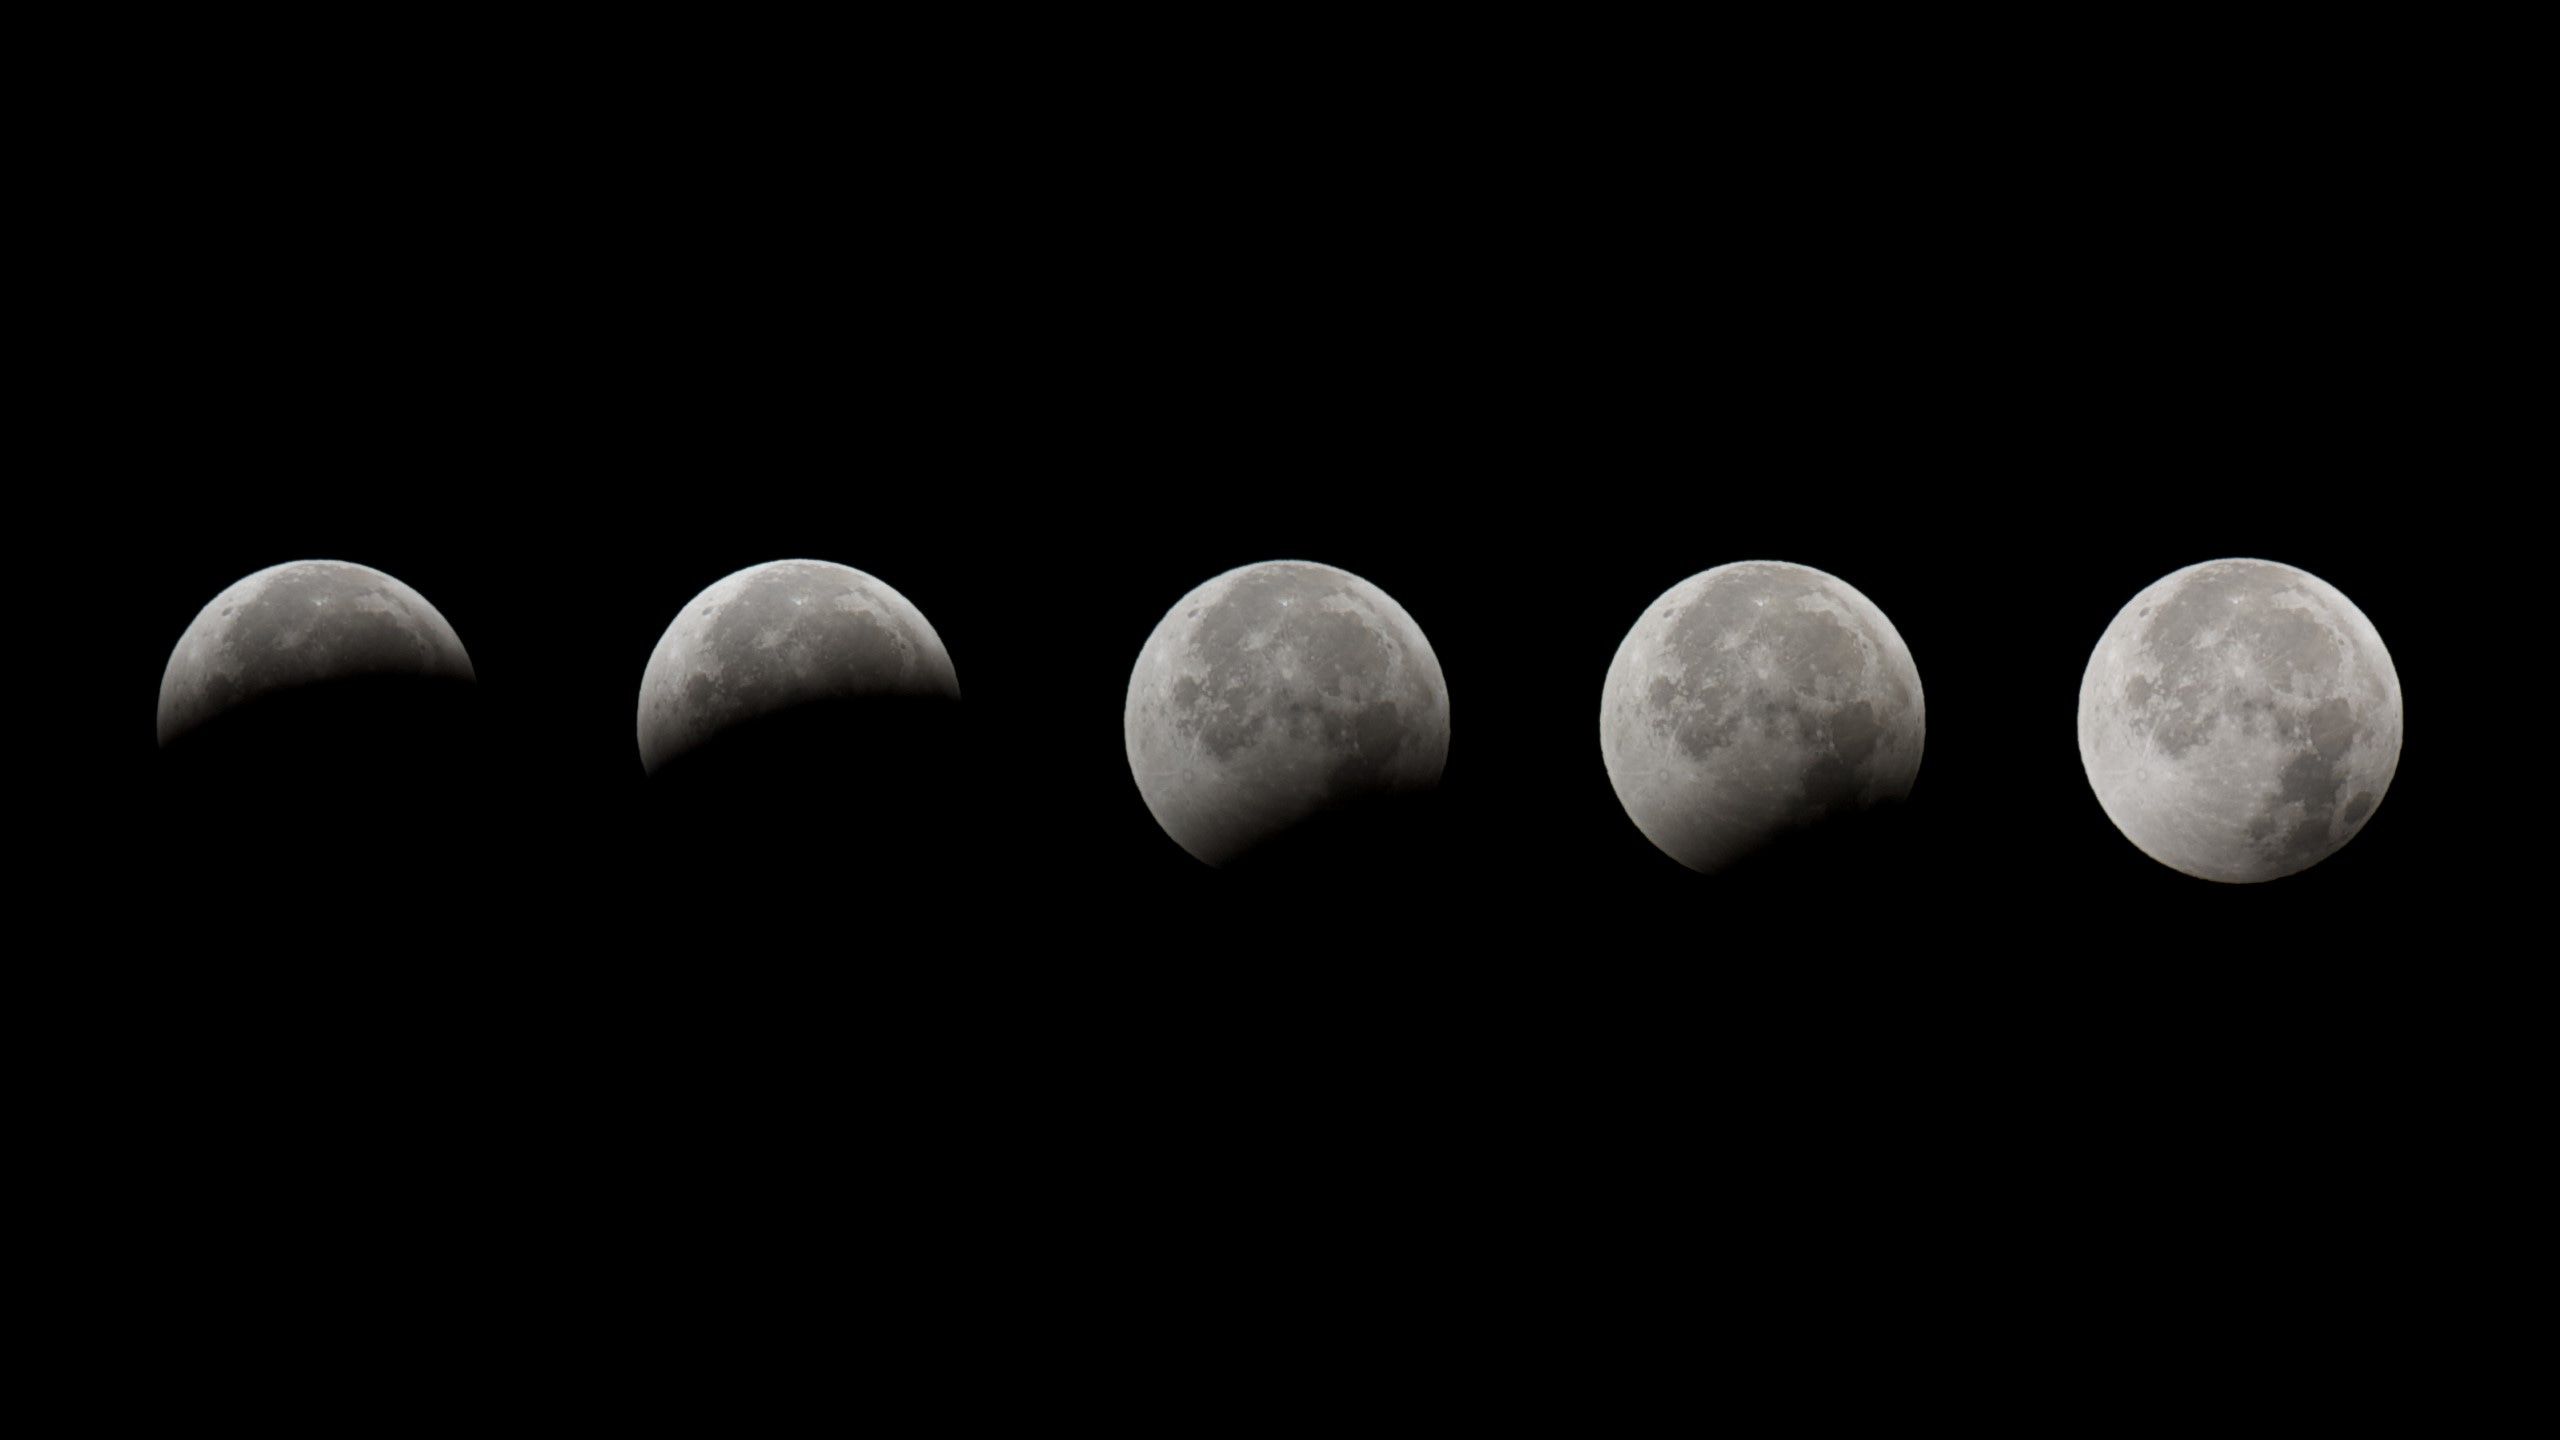 A sequence of images showing the moon during a lunar eclipse - Moon phases